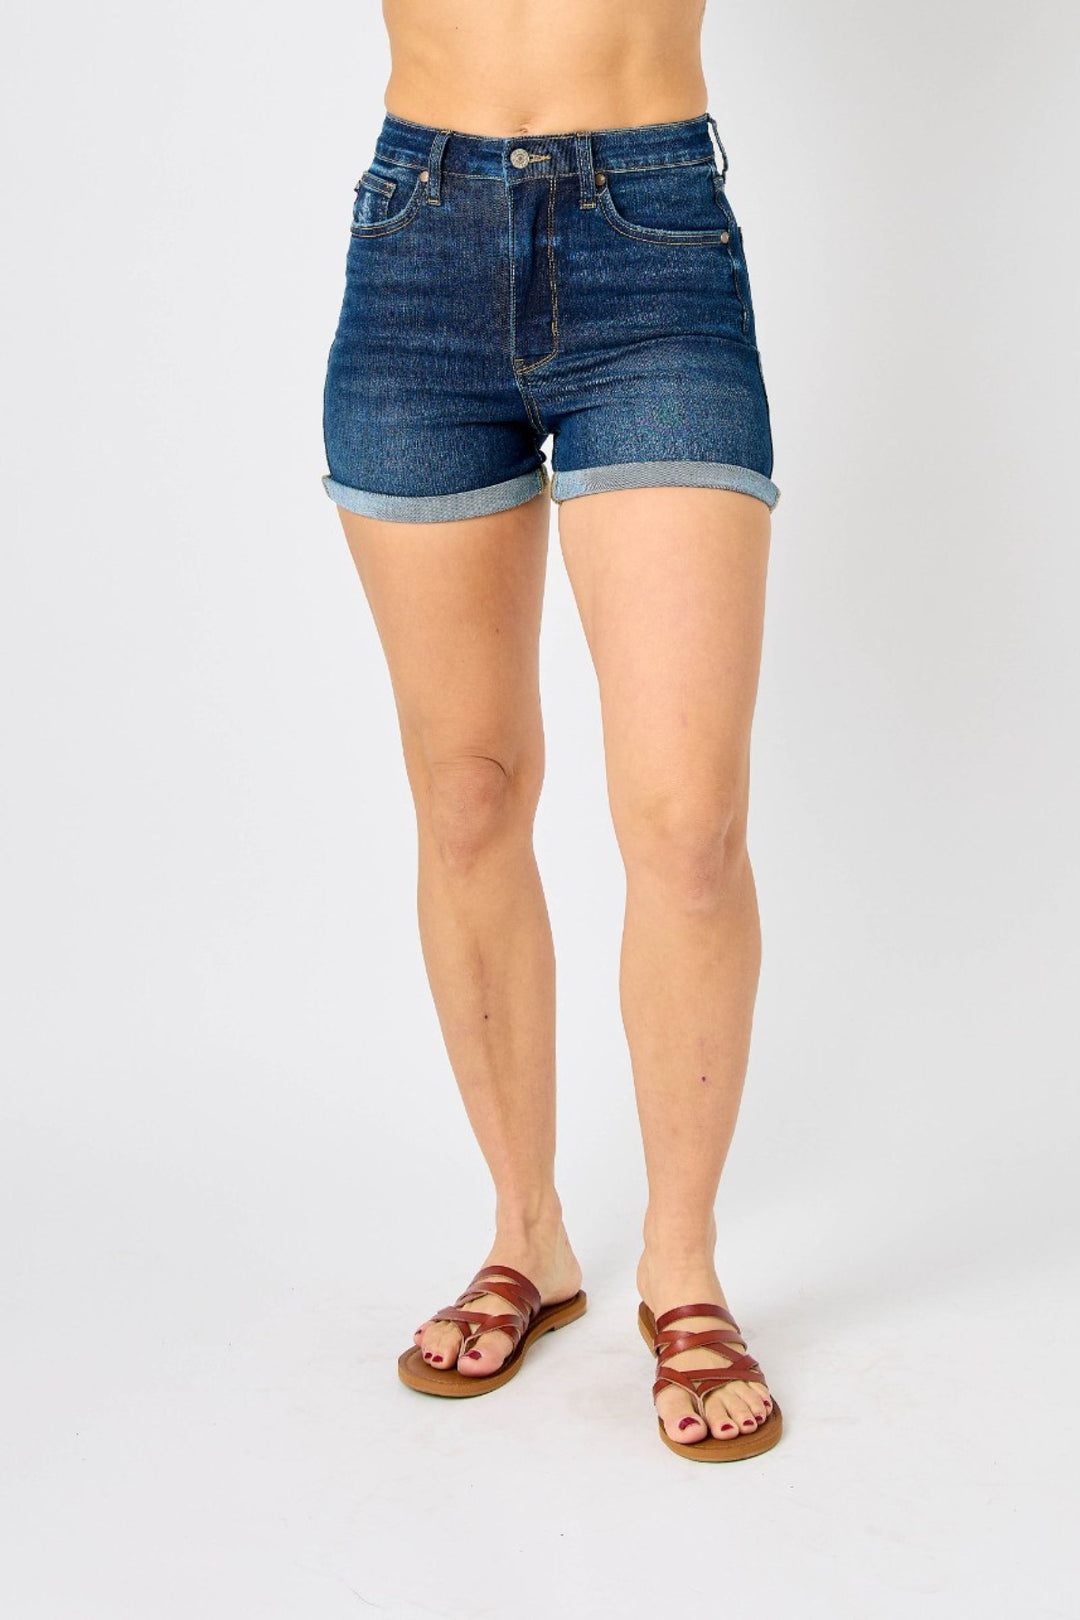 Judy Blue High Rise Cool Denim Shorts-Shorts-Judy Blue-Evergreen Boutique, Women’s Fashion Boutique in Santa Claus, Indiana